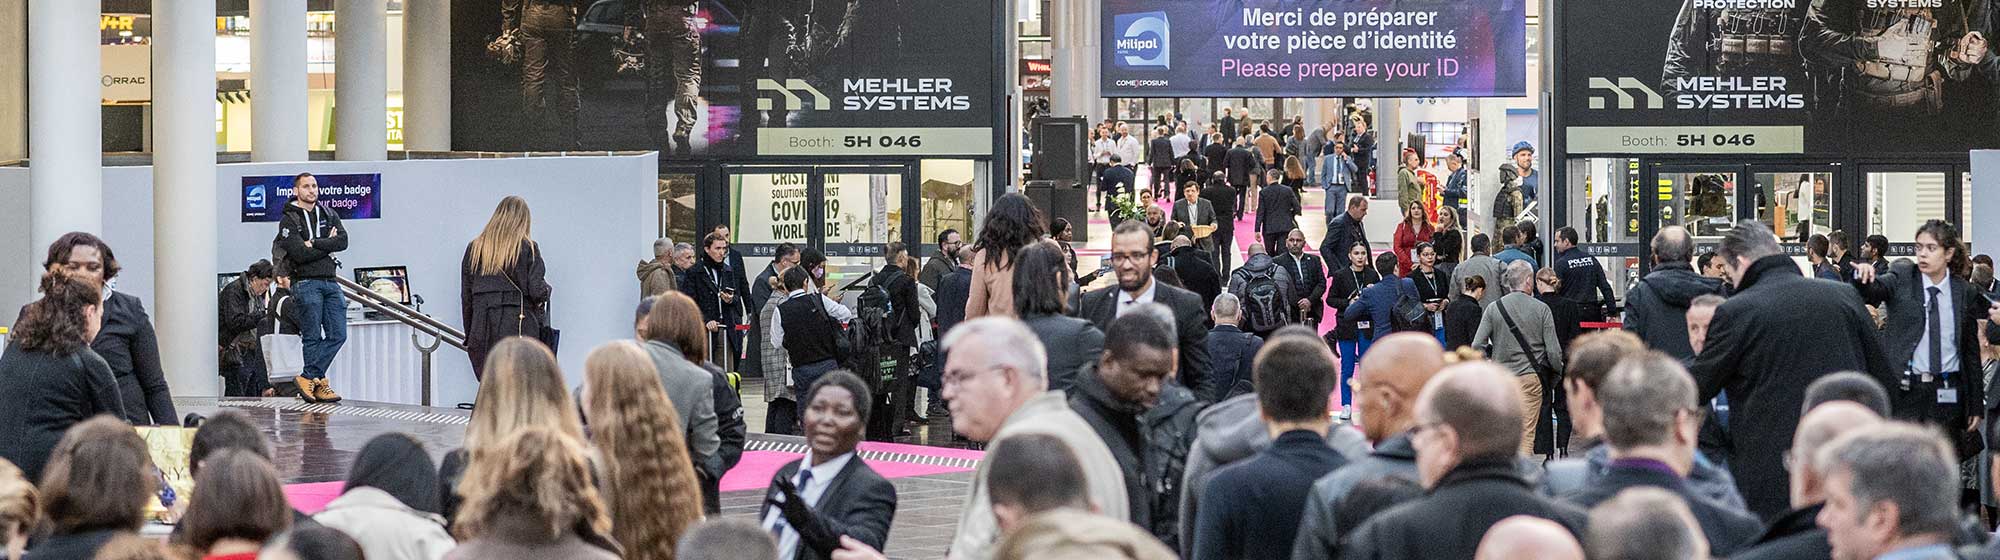 crowds of visitors at the entrance to milipol paris, a welcome banner in aerial signage